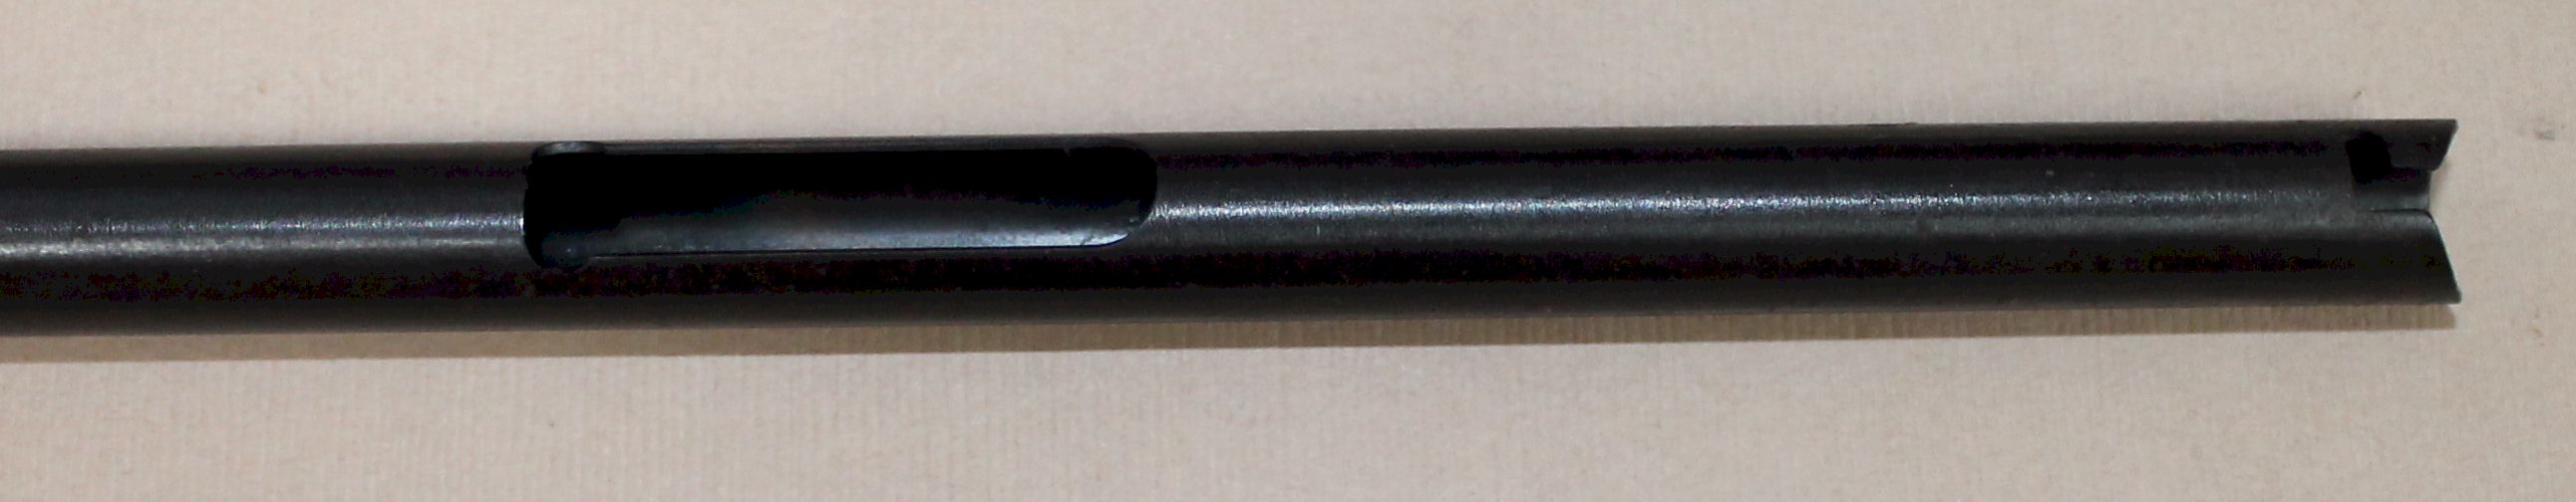 Magazine tube OUTER Winchester model 61 MAGNUM